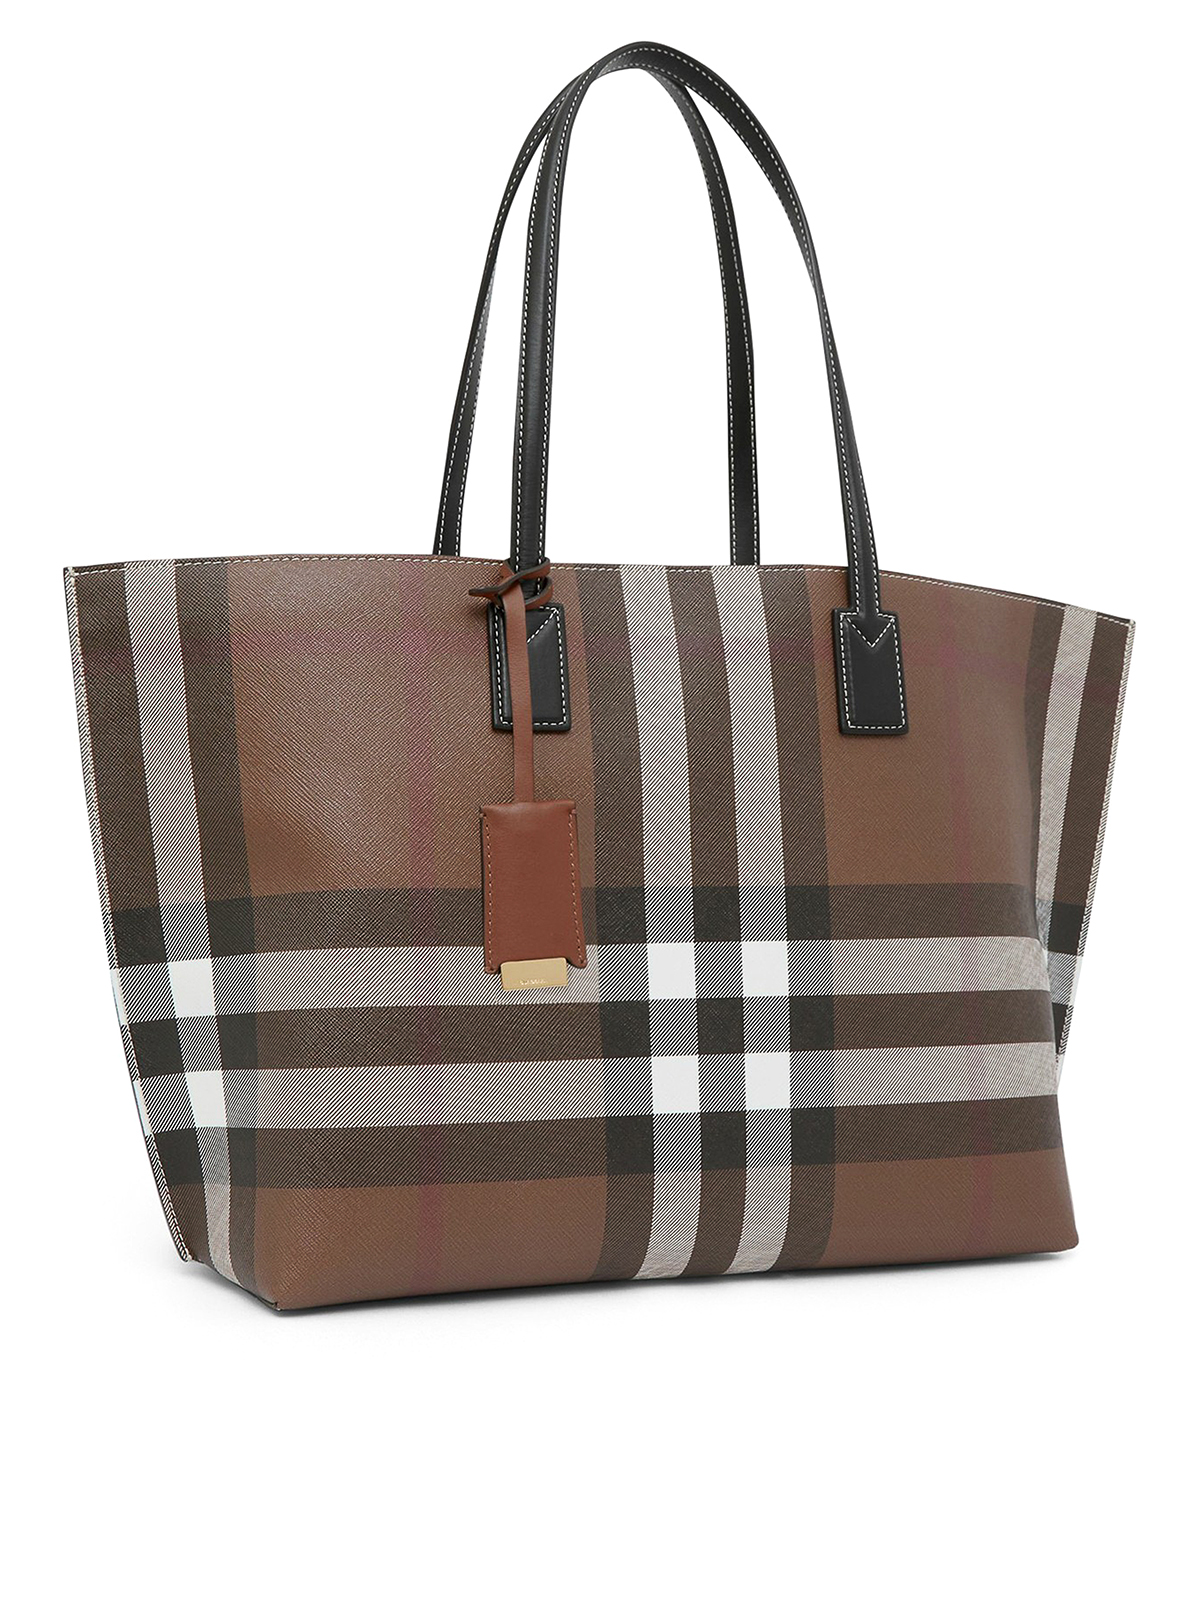 Totes bags Burberry - Tartan leather bag with tag - 8052504